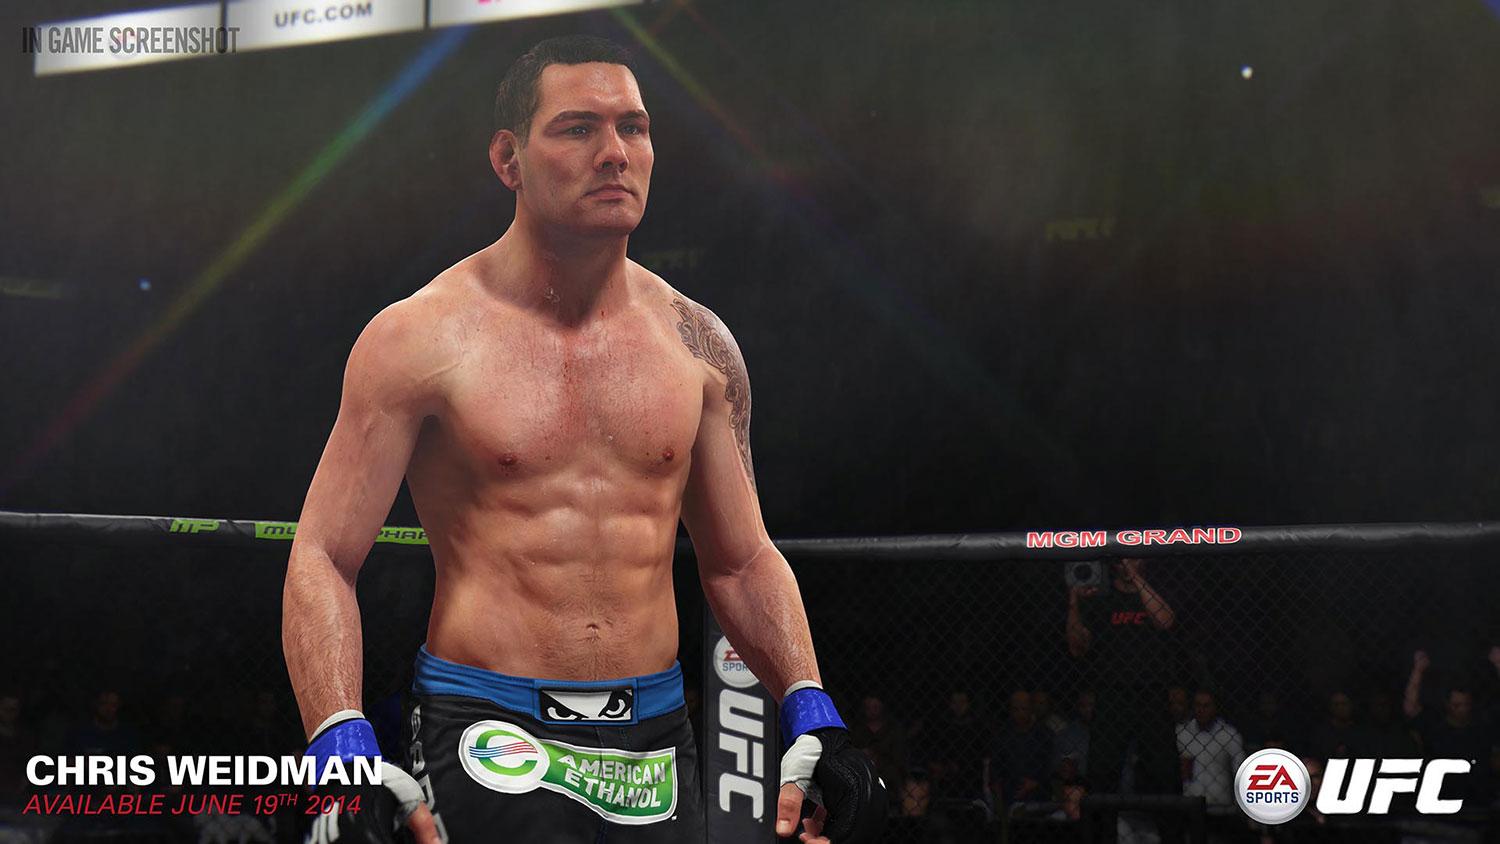 EA UFC 5 Release Date: Fighter Ratings, Screenshots And Game Mode Info